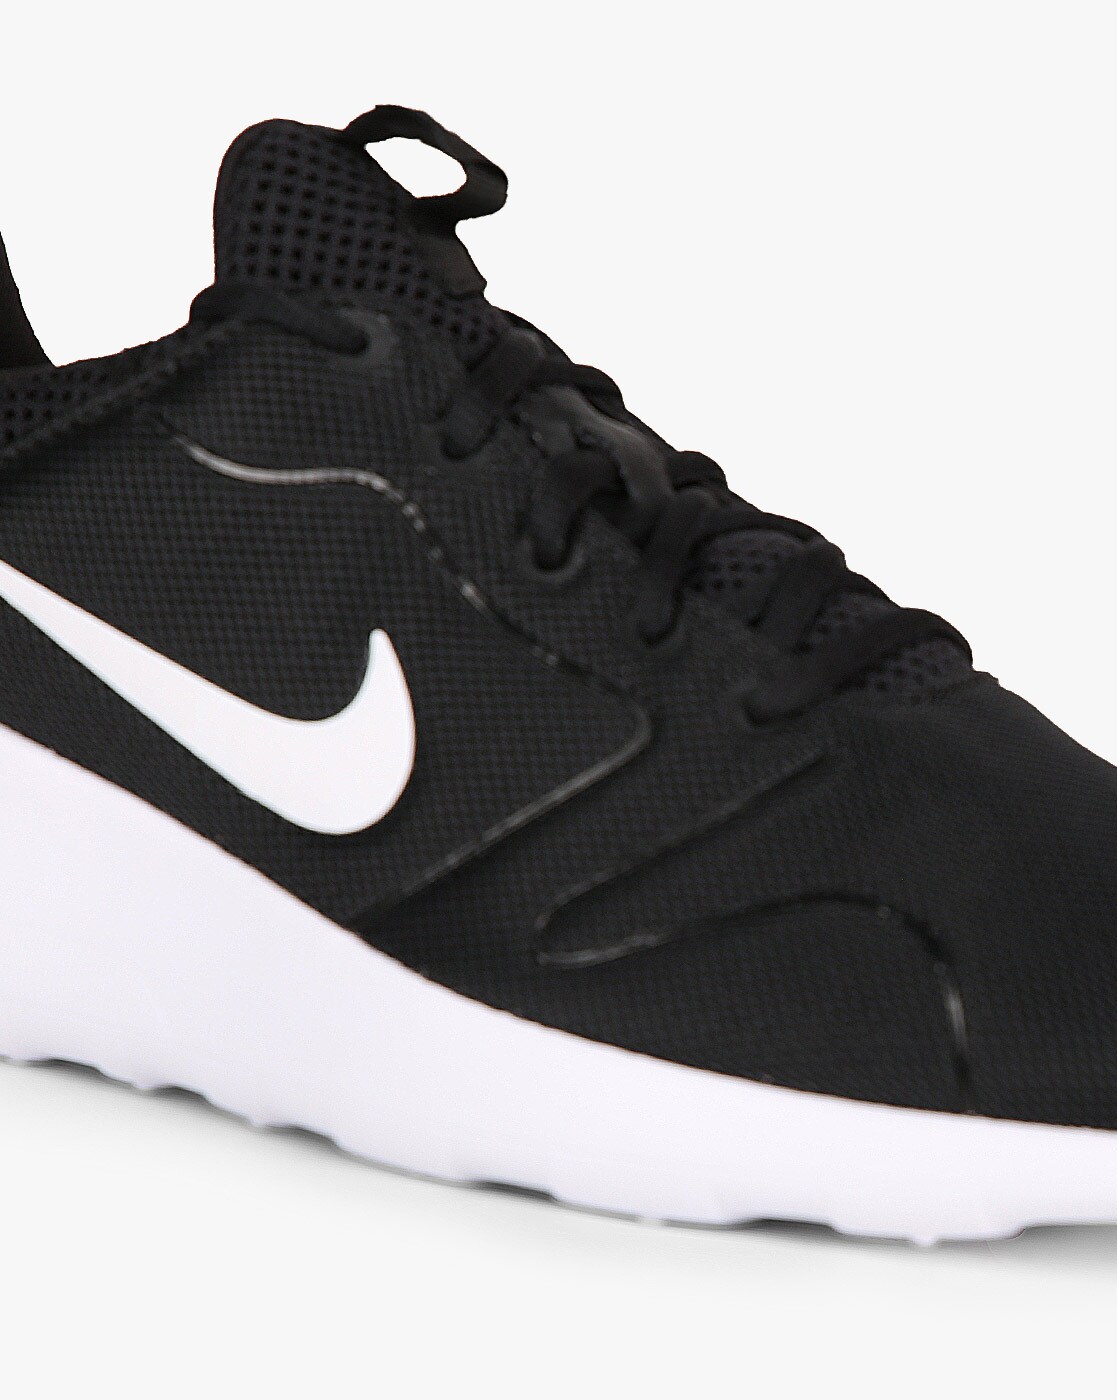 Buy Black Sports Shoes for Men by NIKE Online 